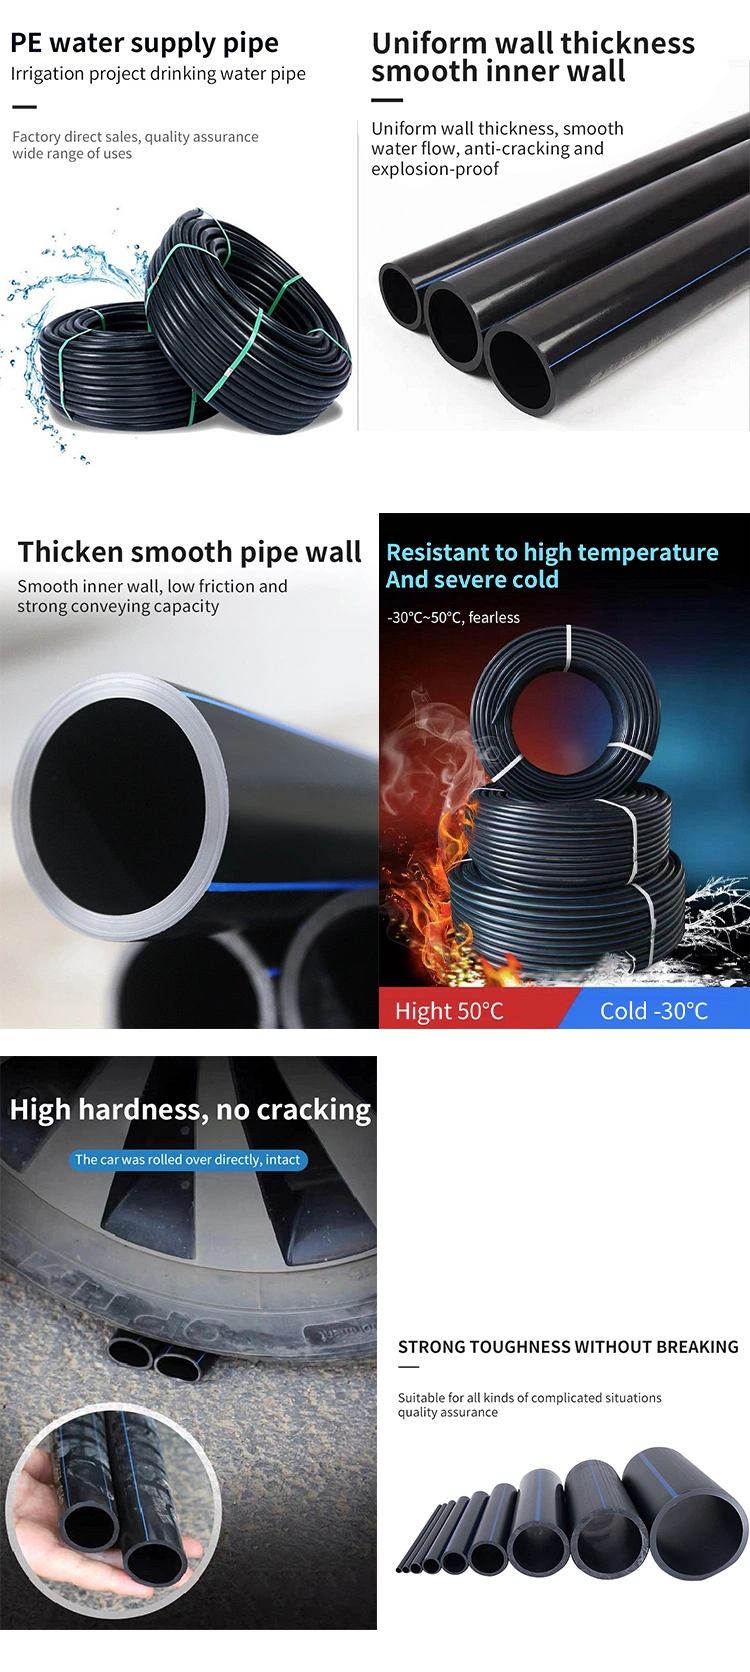 HDPE Water Supply Pipe PE100 Black Water Pipes Supplier Drainage Water Sewage Pipe